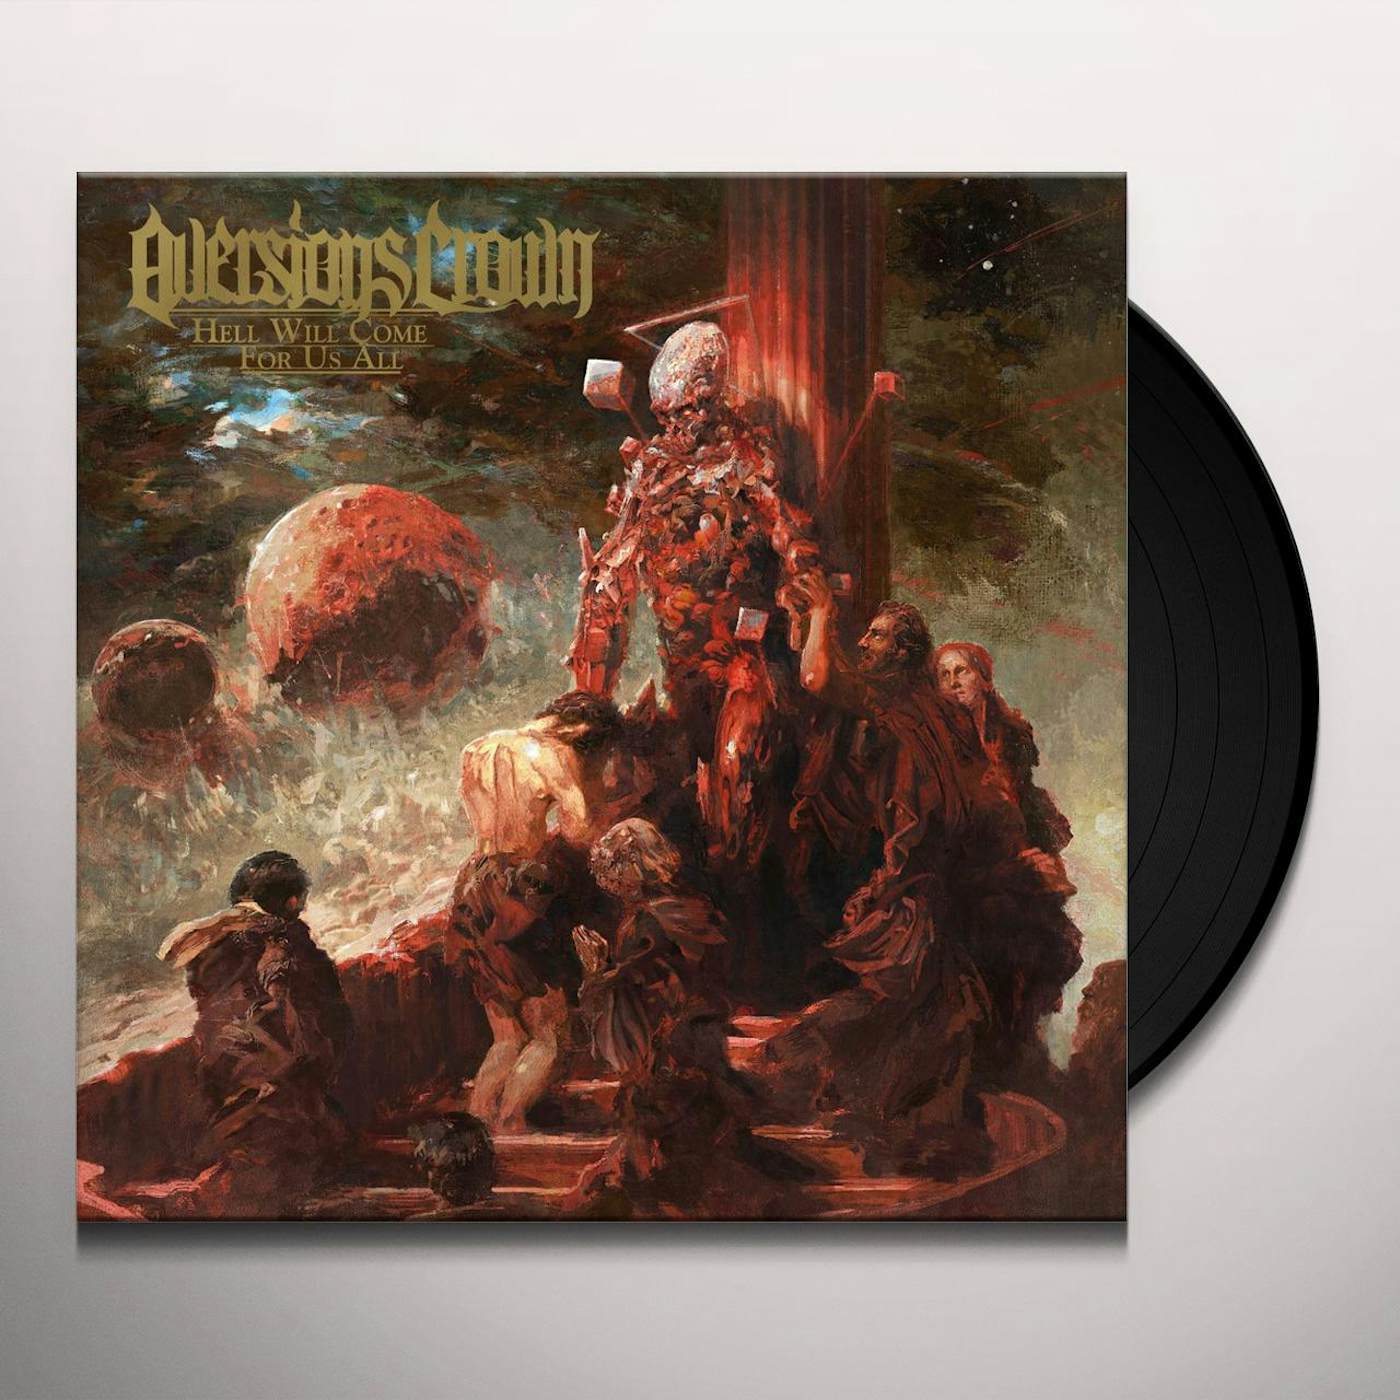 Aversions Crown Hell Will Come for Us All Vinyl Record